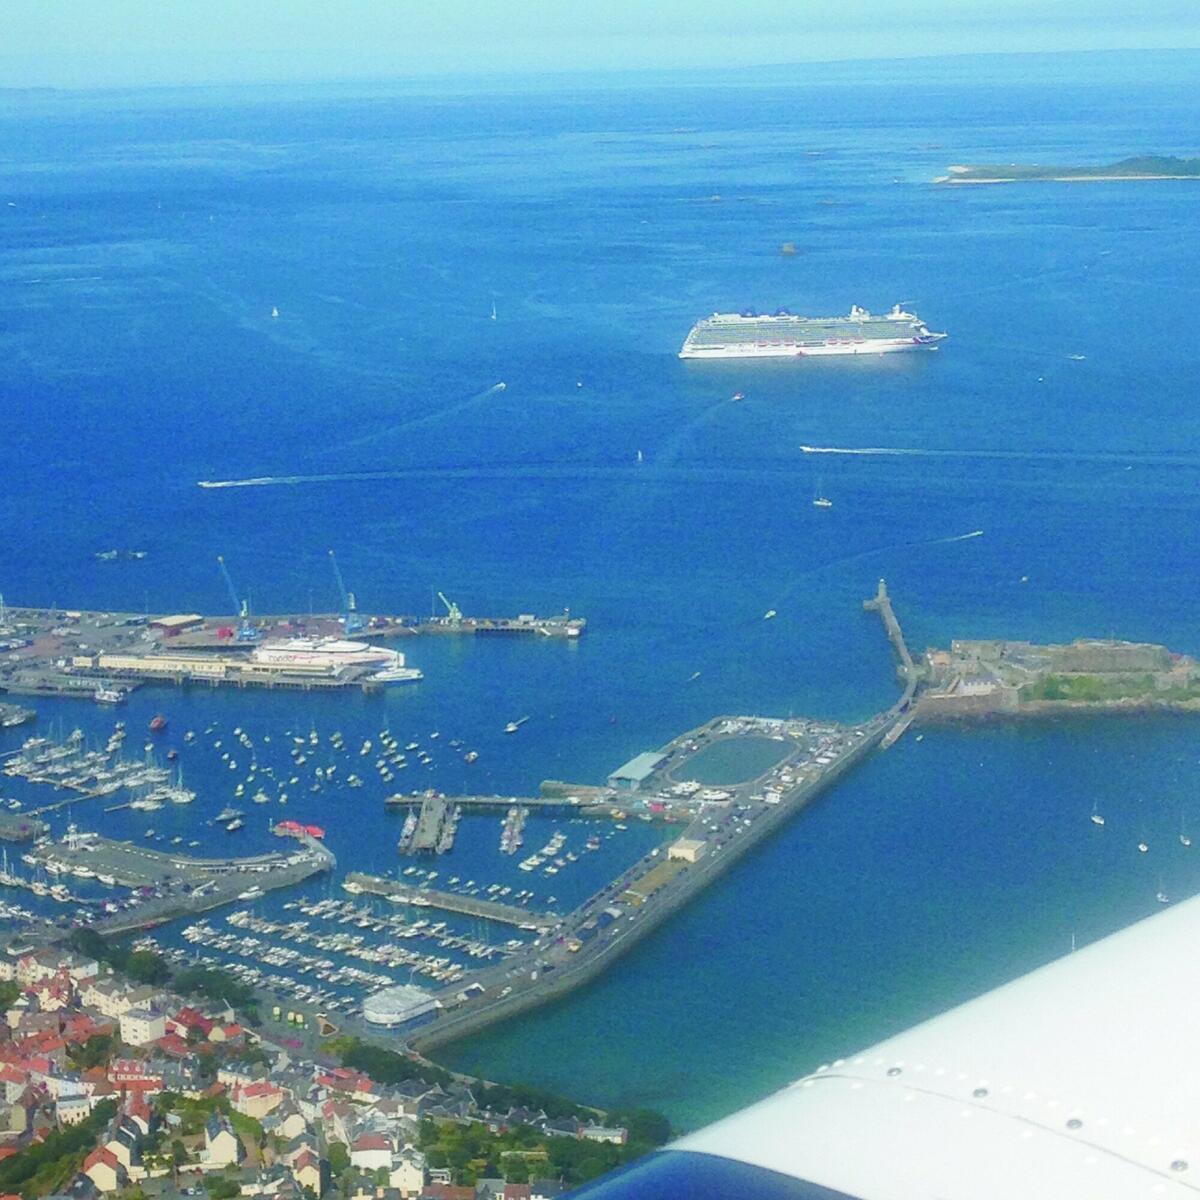 Club members fly out to Guernsey